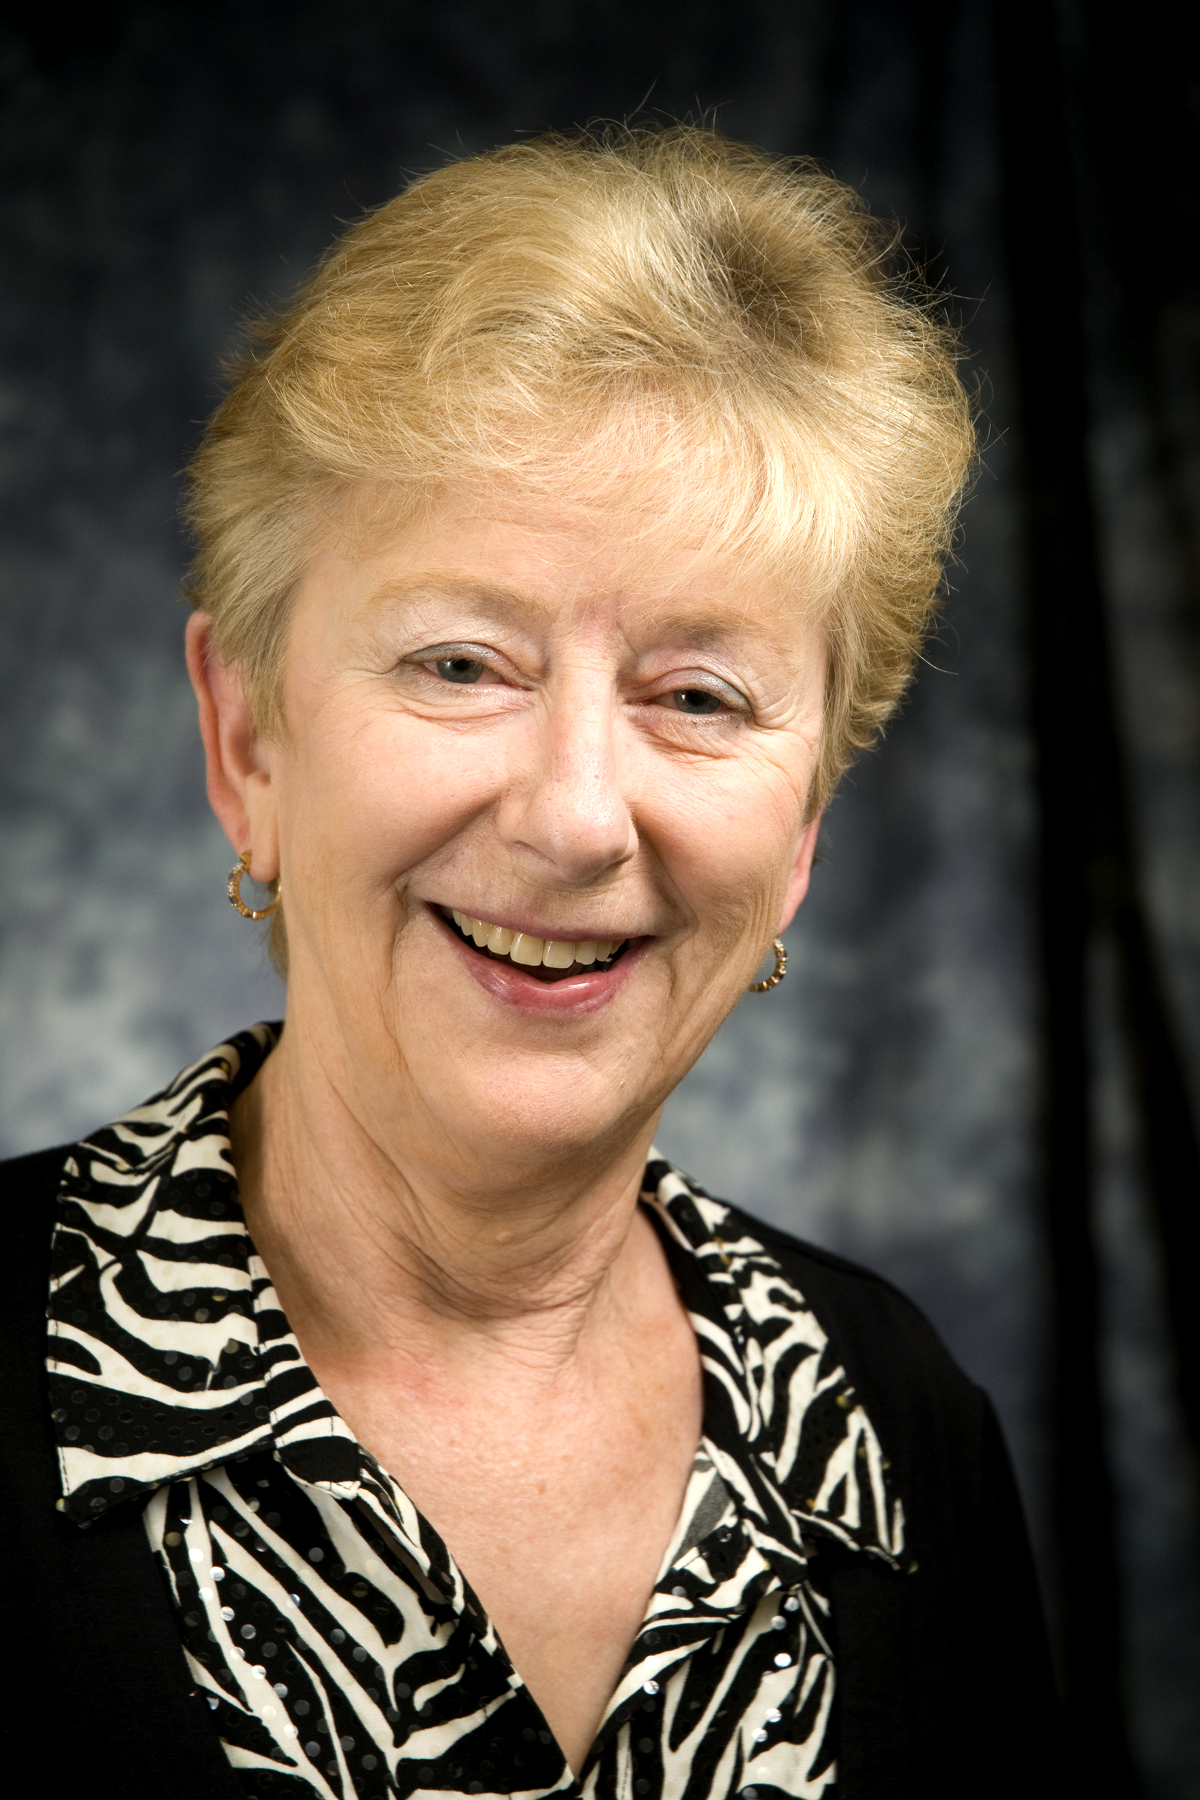 Carol Epp retired from her role as office manager for convention planning in August 2015 after 25 years.